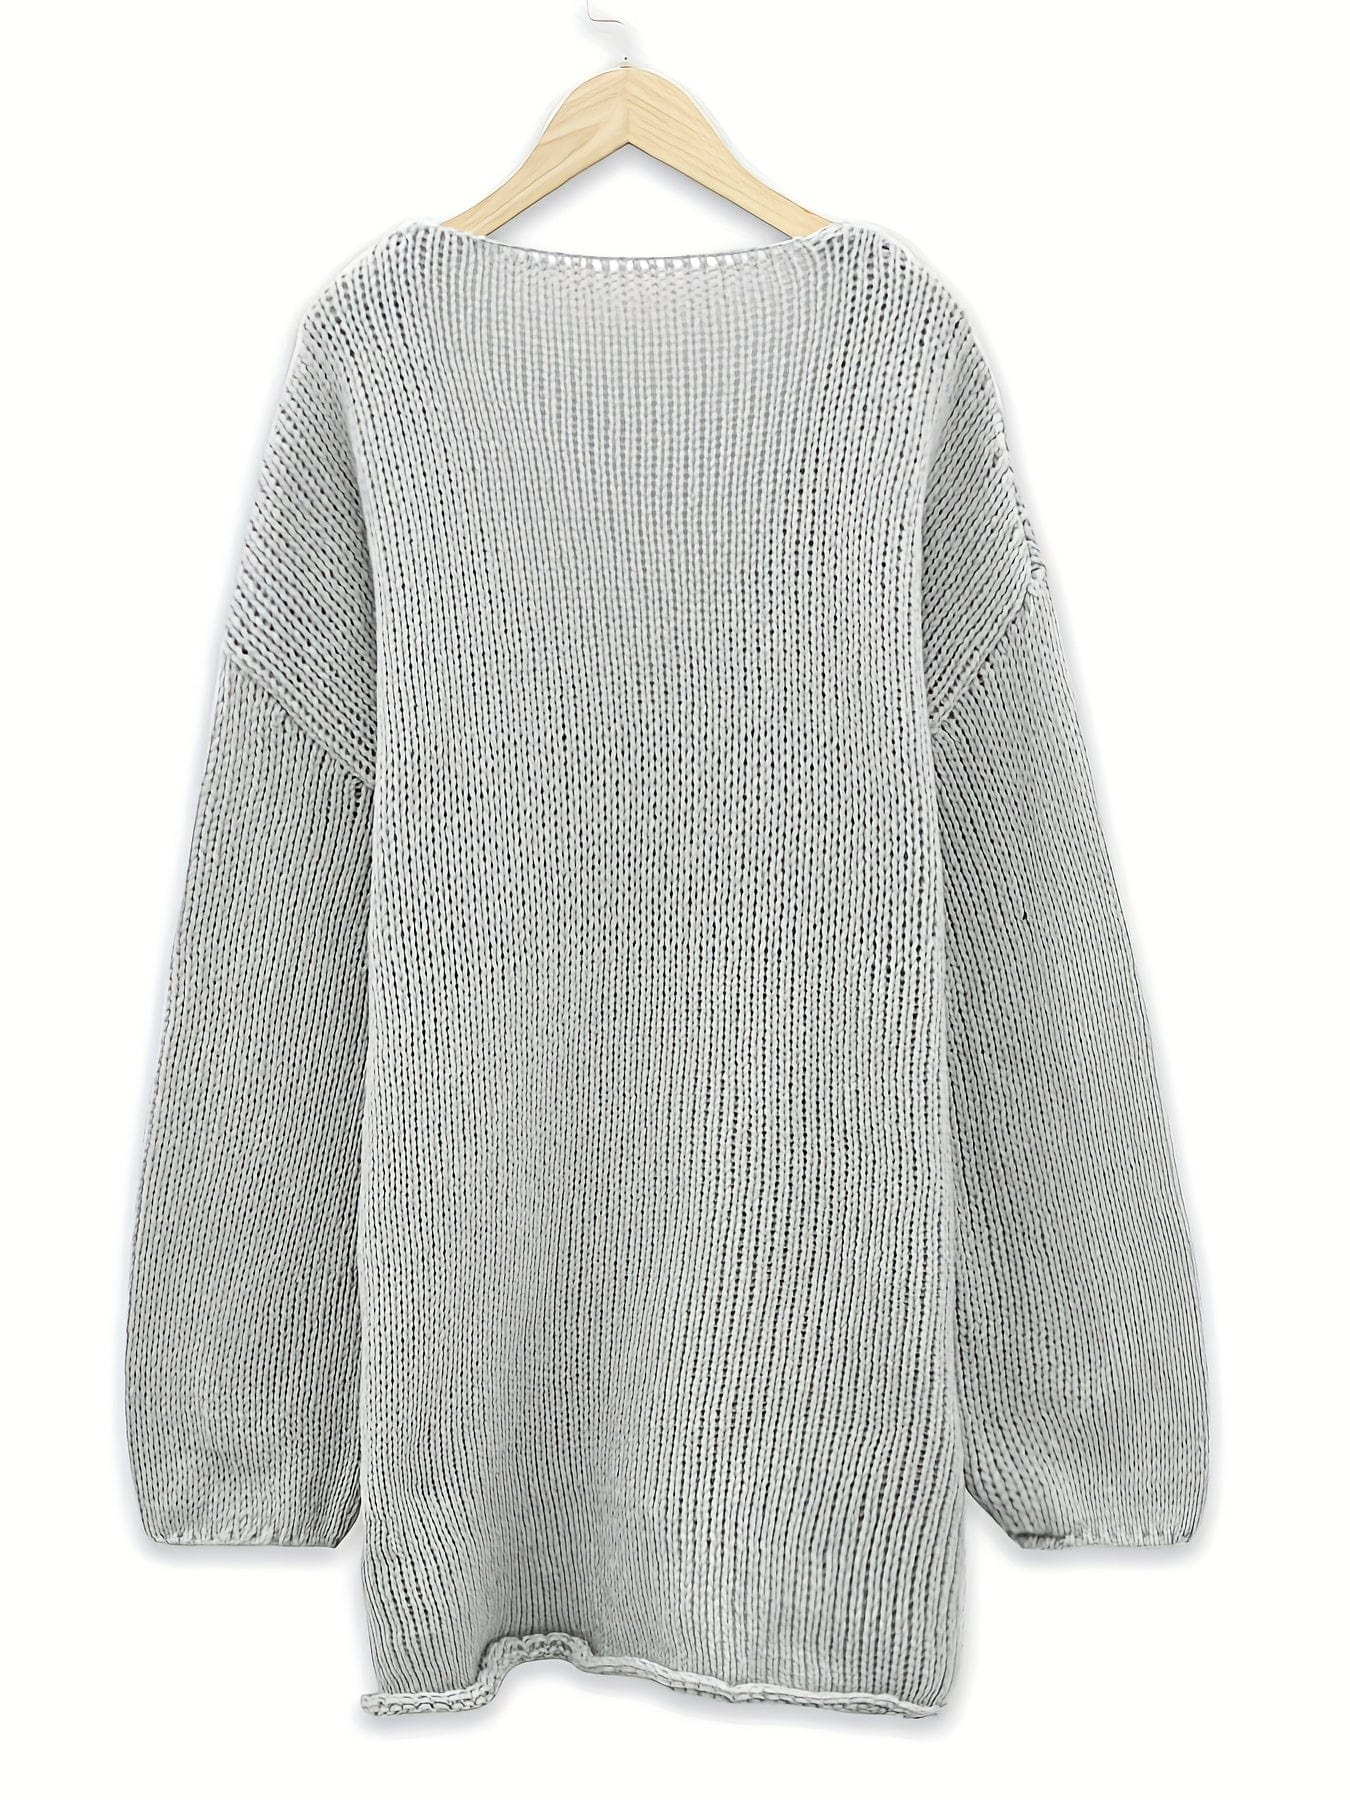 Plus Size Casual Sweater, Women's Plus Solid Long Sleeve V Neck Oversized Jumper